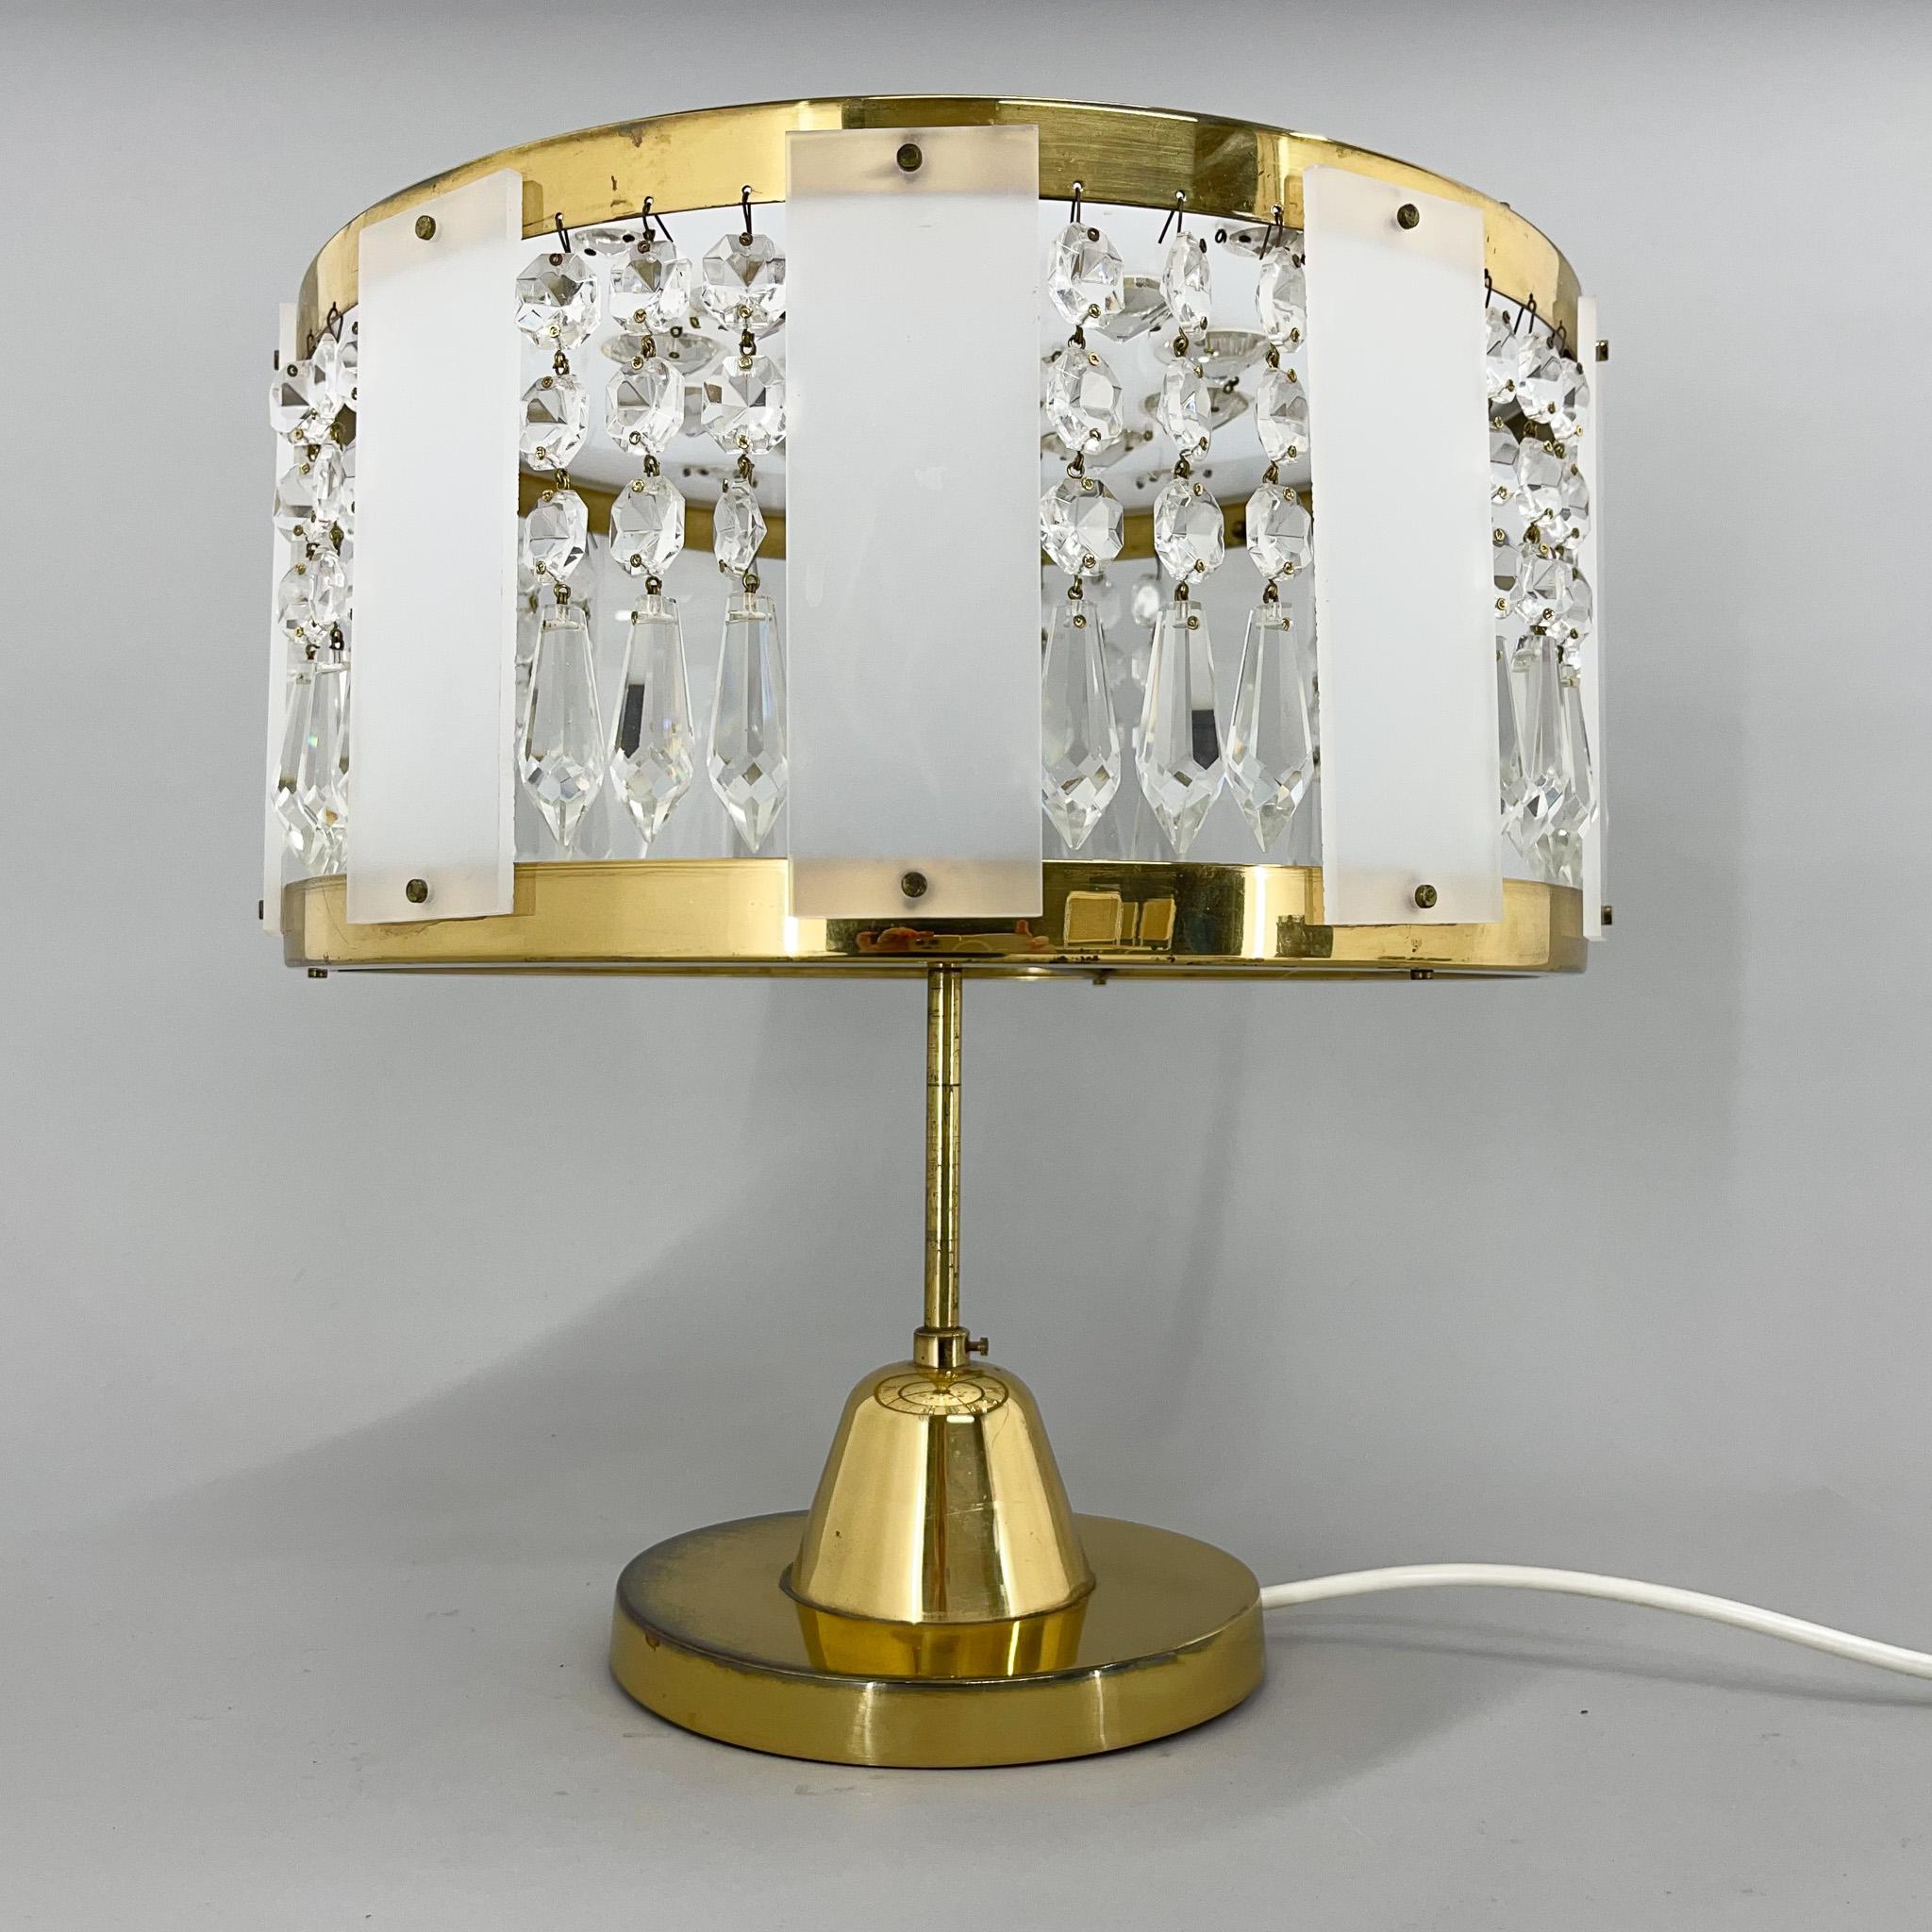 Unusual table lamp, produced in former Czechoslovakia by Novy Bydzov Glassworks, One crystal is missing at the top (see photo), but this does not affect the beauty of the light that the lamp casts. There are 2 pieces available.